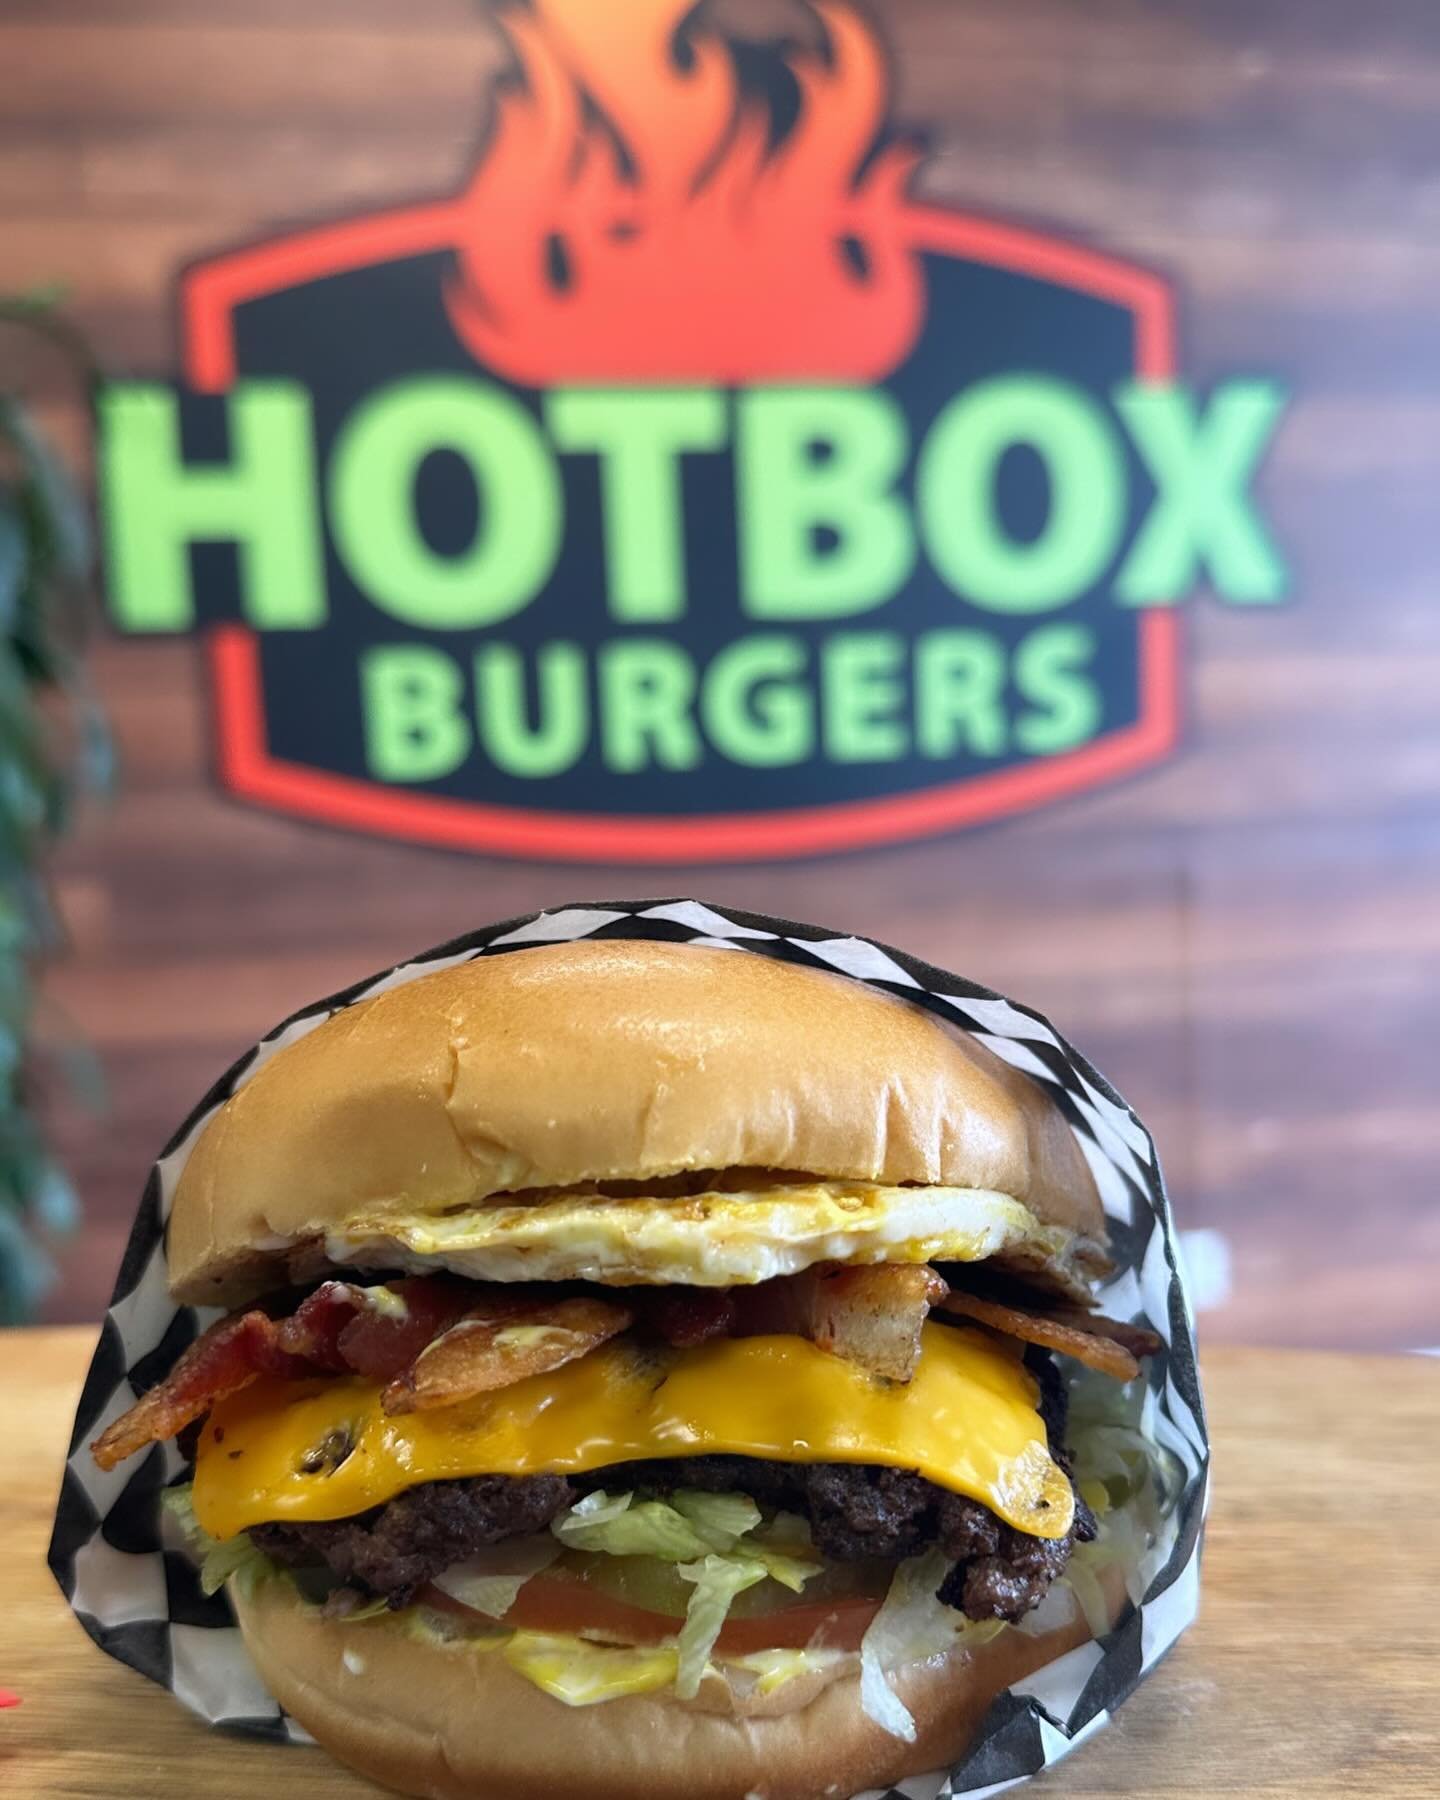 Hey HotBox Fam! Happy 4/20! We got your munchies covered 😋 Come on down to the restaurant and try our 420 cheeseburger 🍔 🥓🍳 We are open today from 10am-7pm. We can&rsquo;t wait to see y&rsquo;all here! 😍